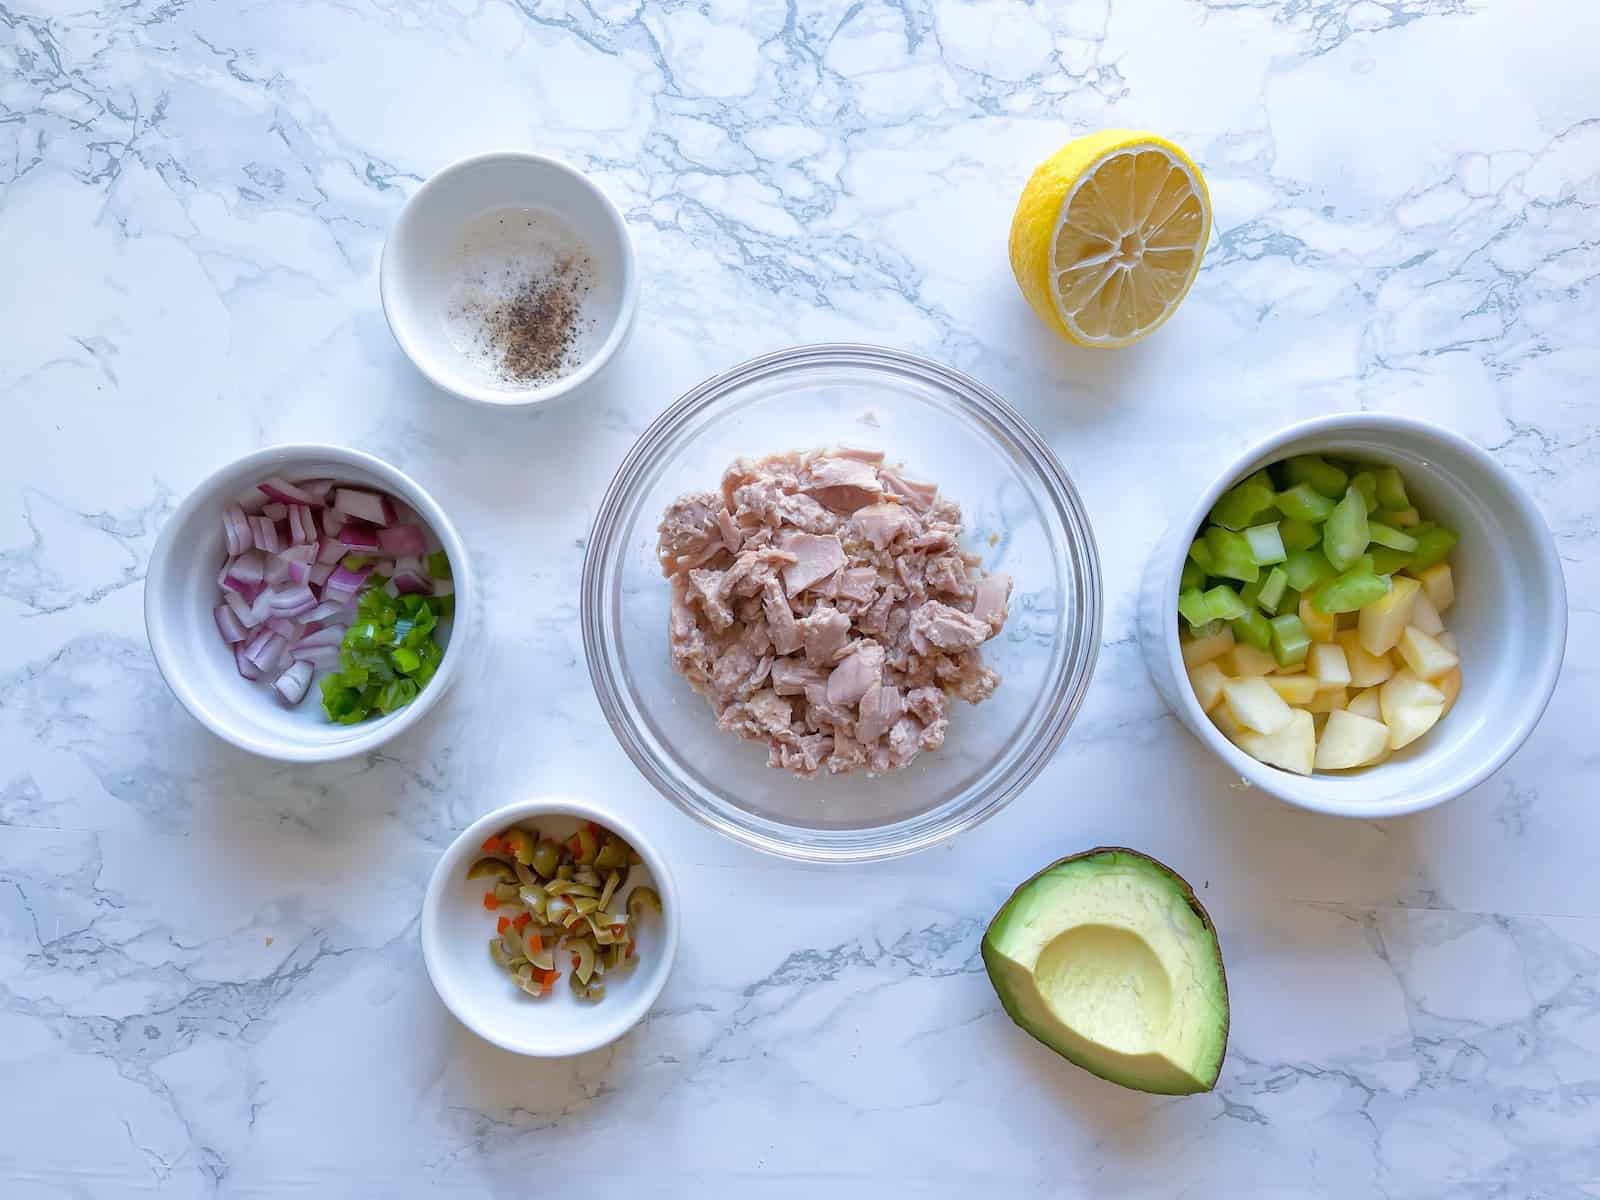 Ingredients for tuna salad without mayo in small bowls on a marble table